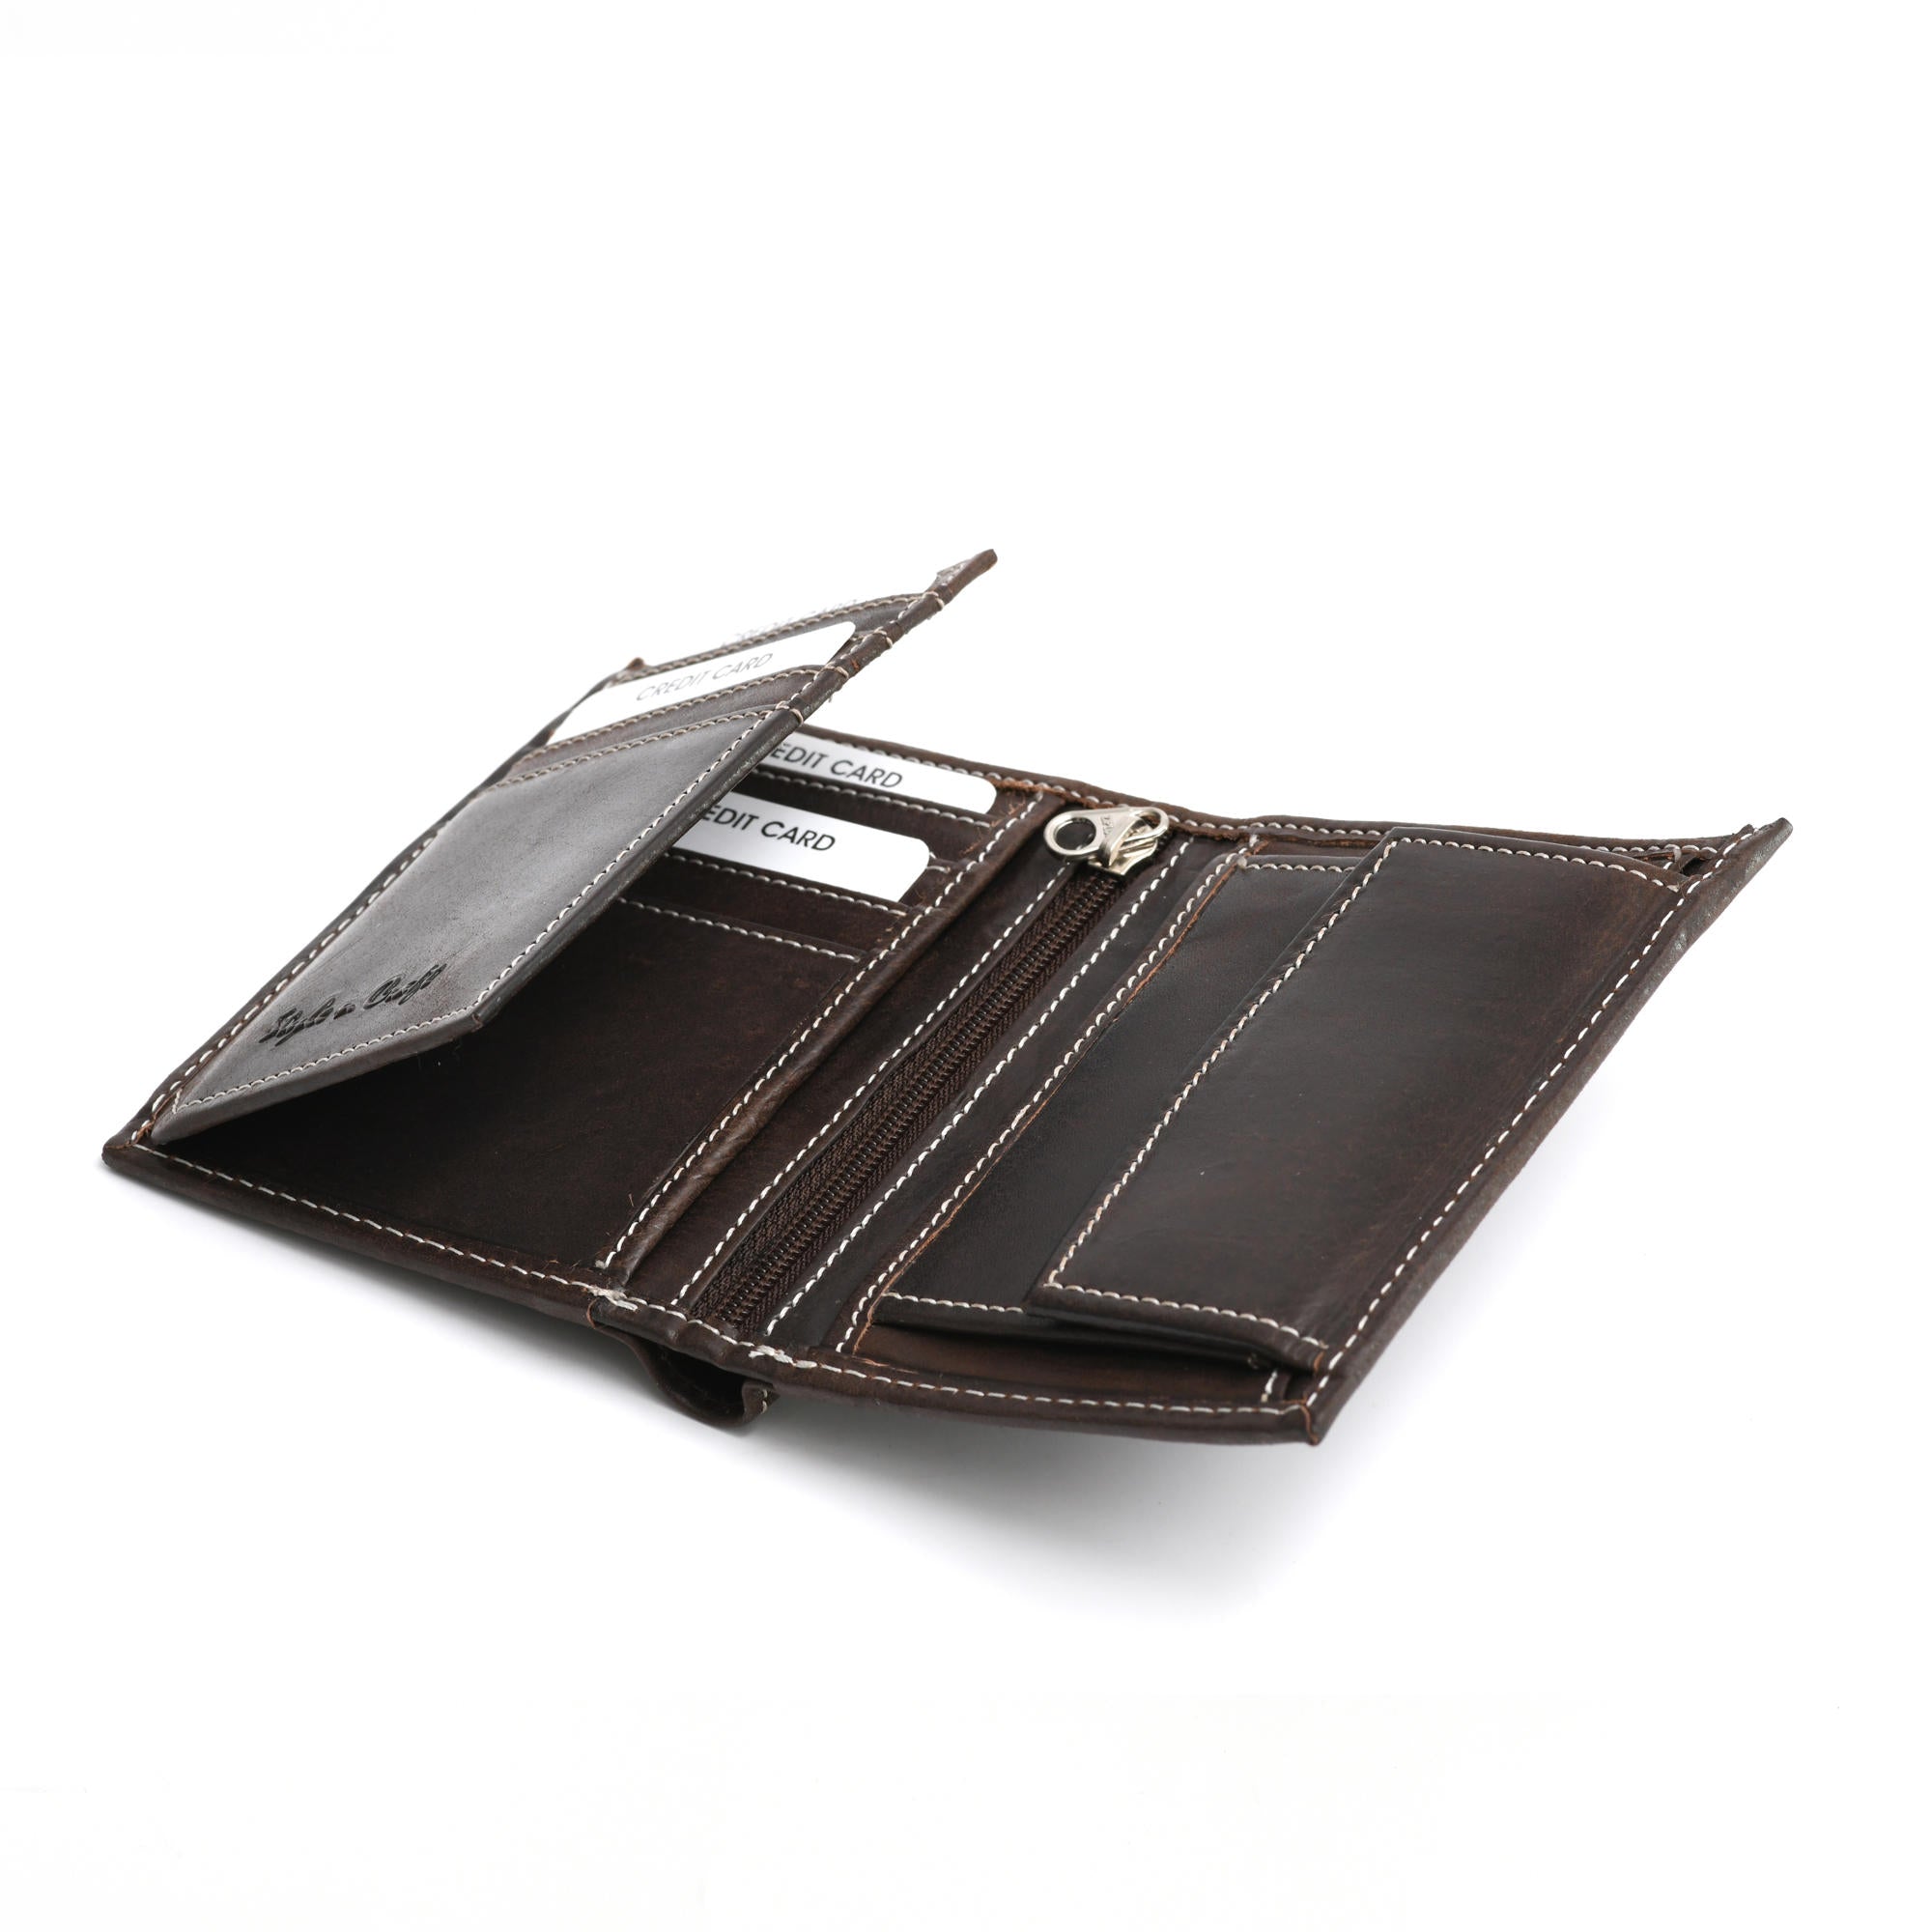 391007 Hipster Wallet with Flap in Dark Brown Leather | Style n Craft